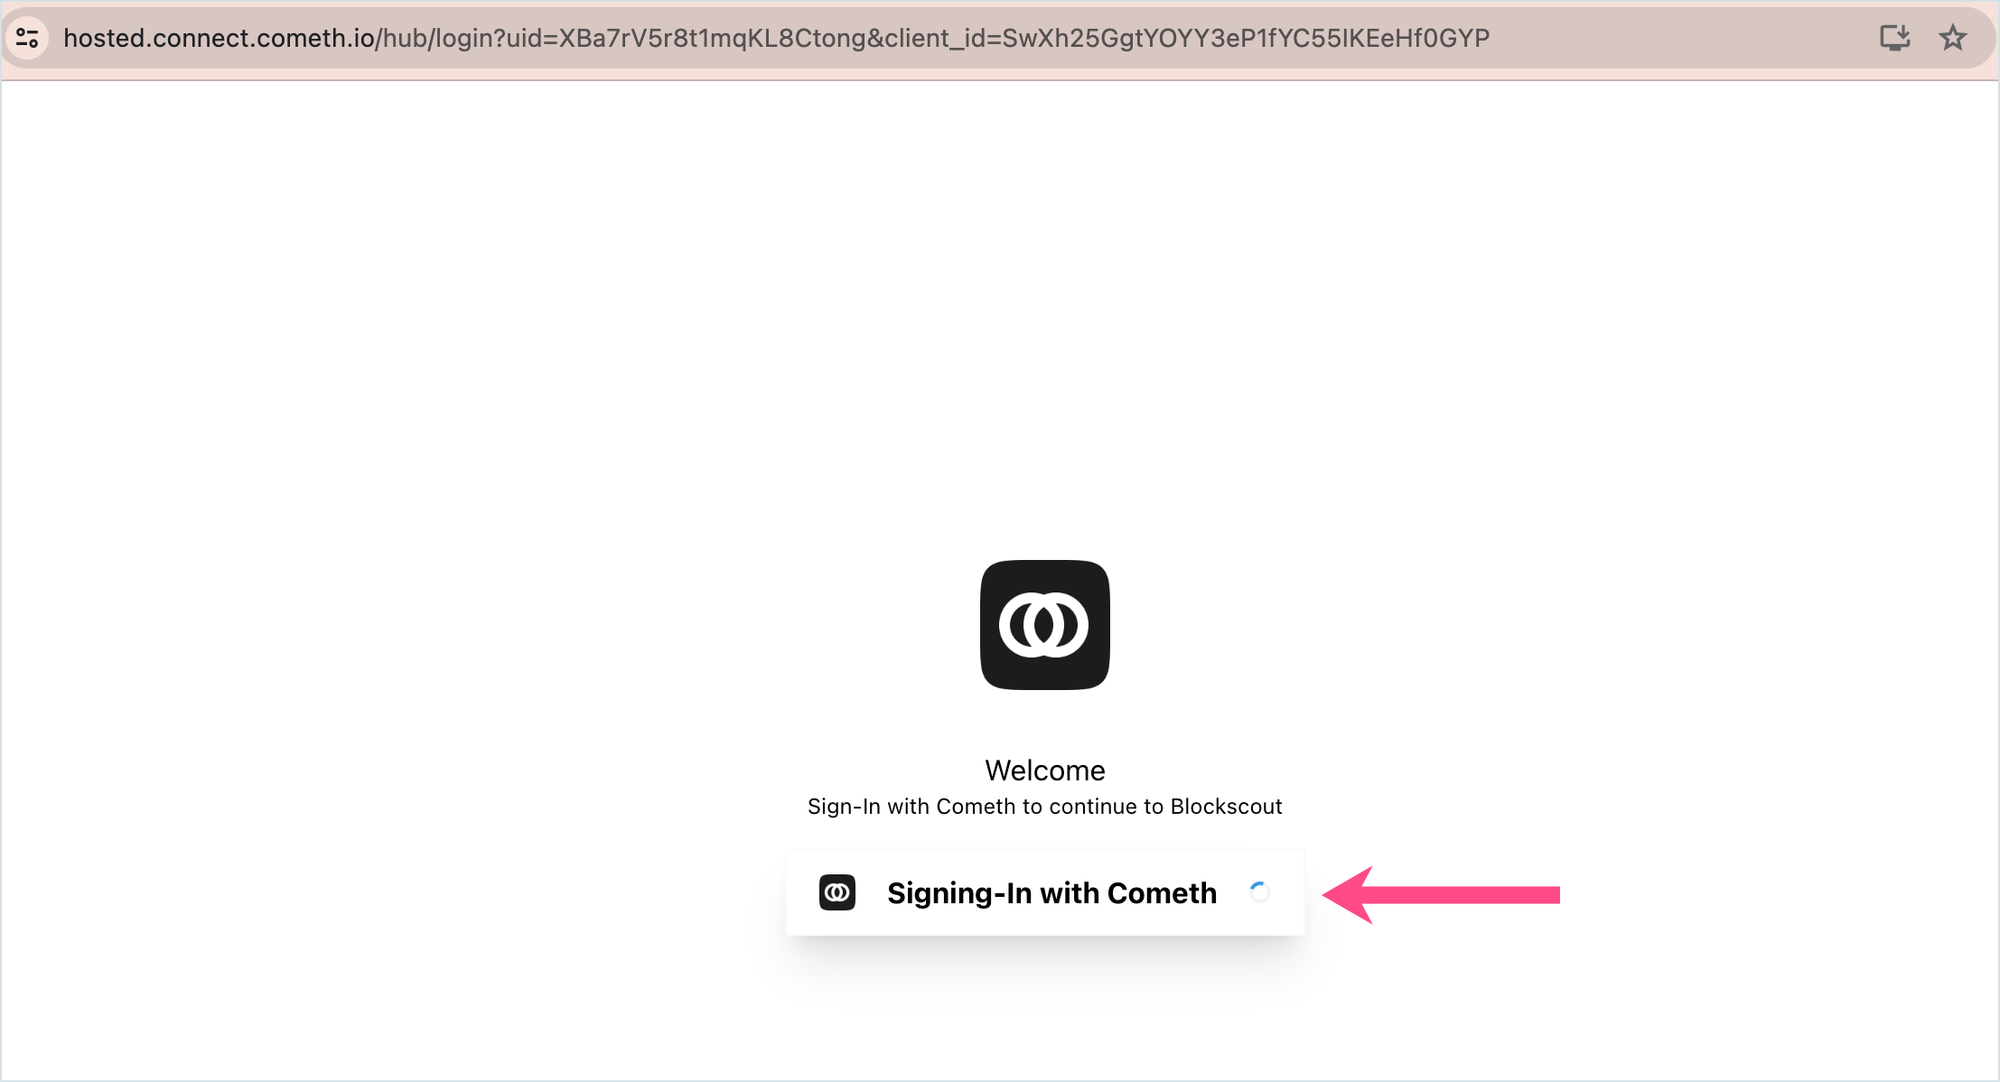 Cometh integration provides easy, anonymous account creation